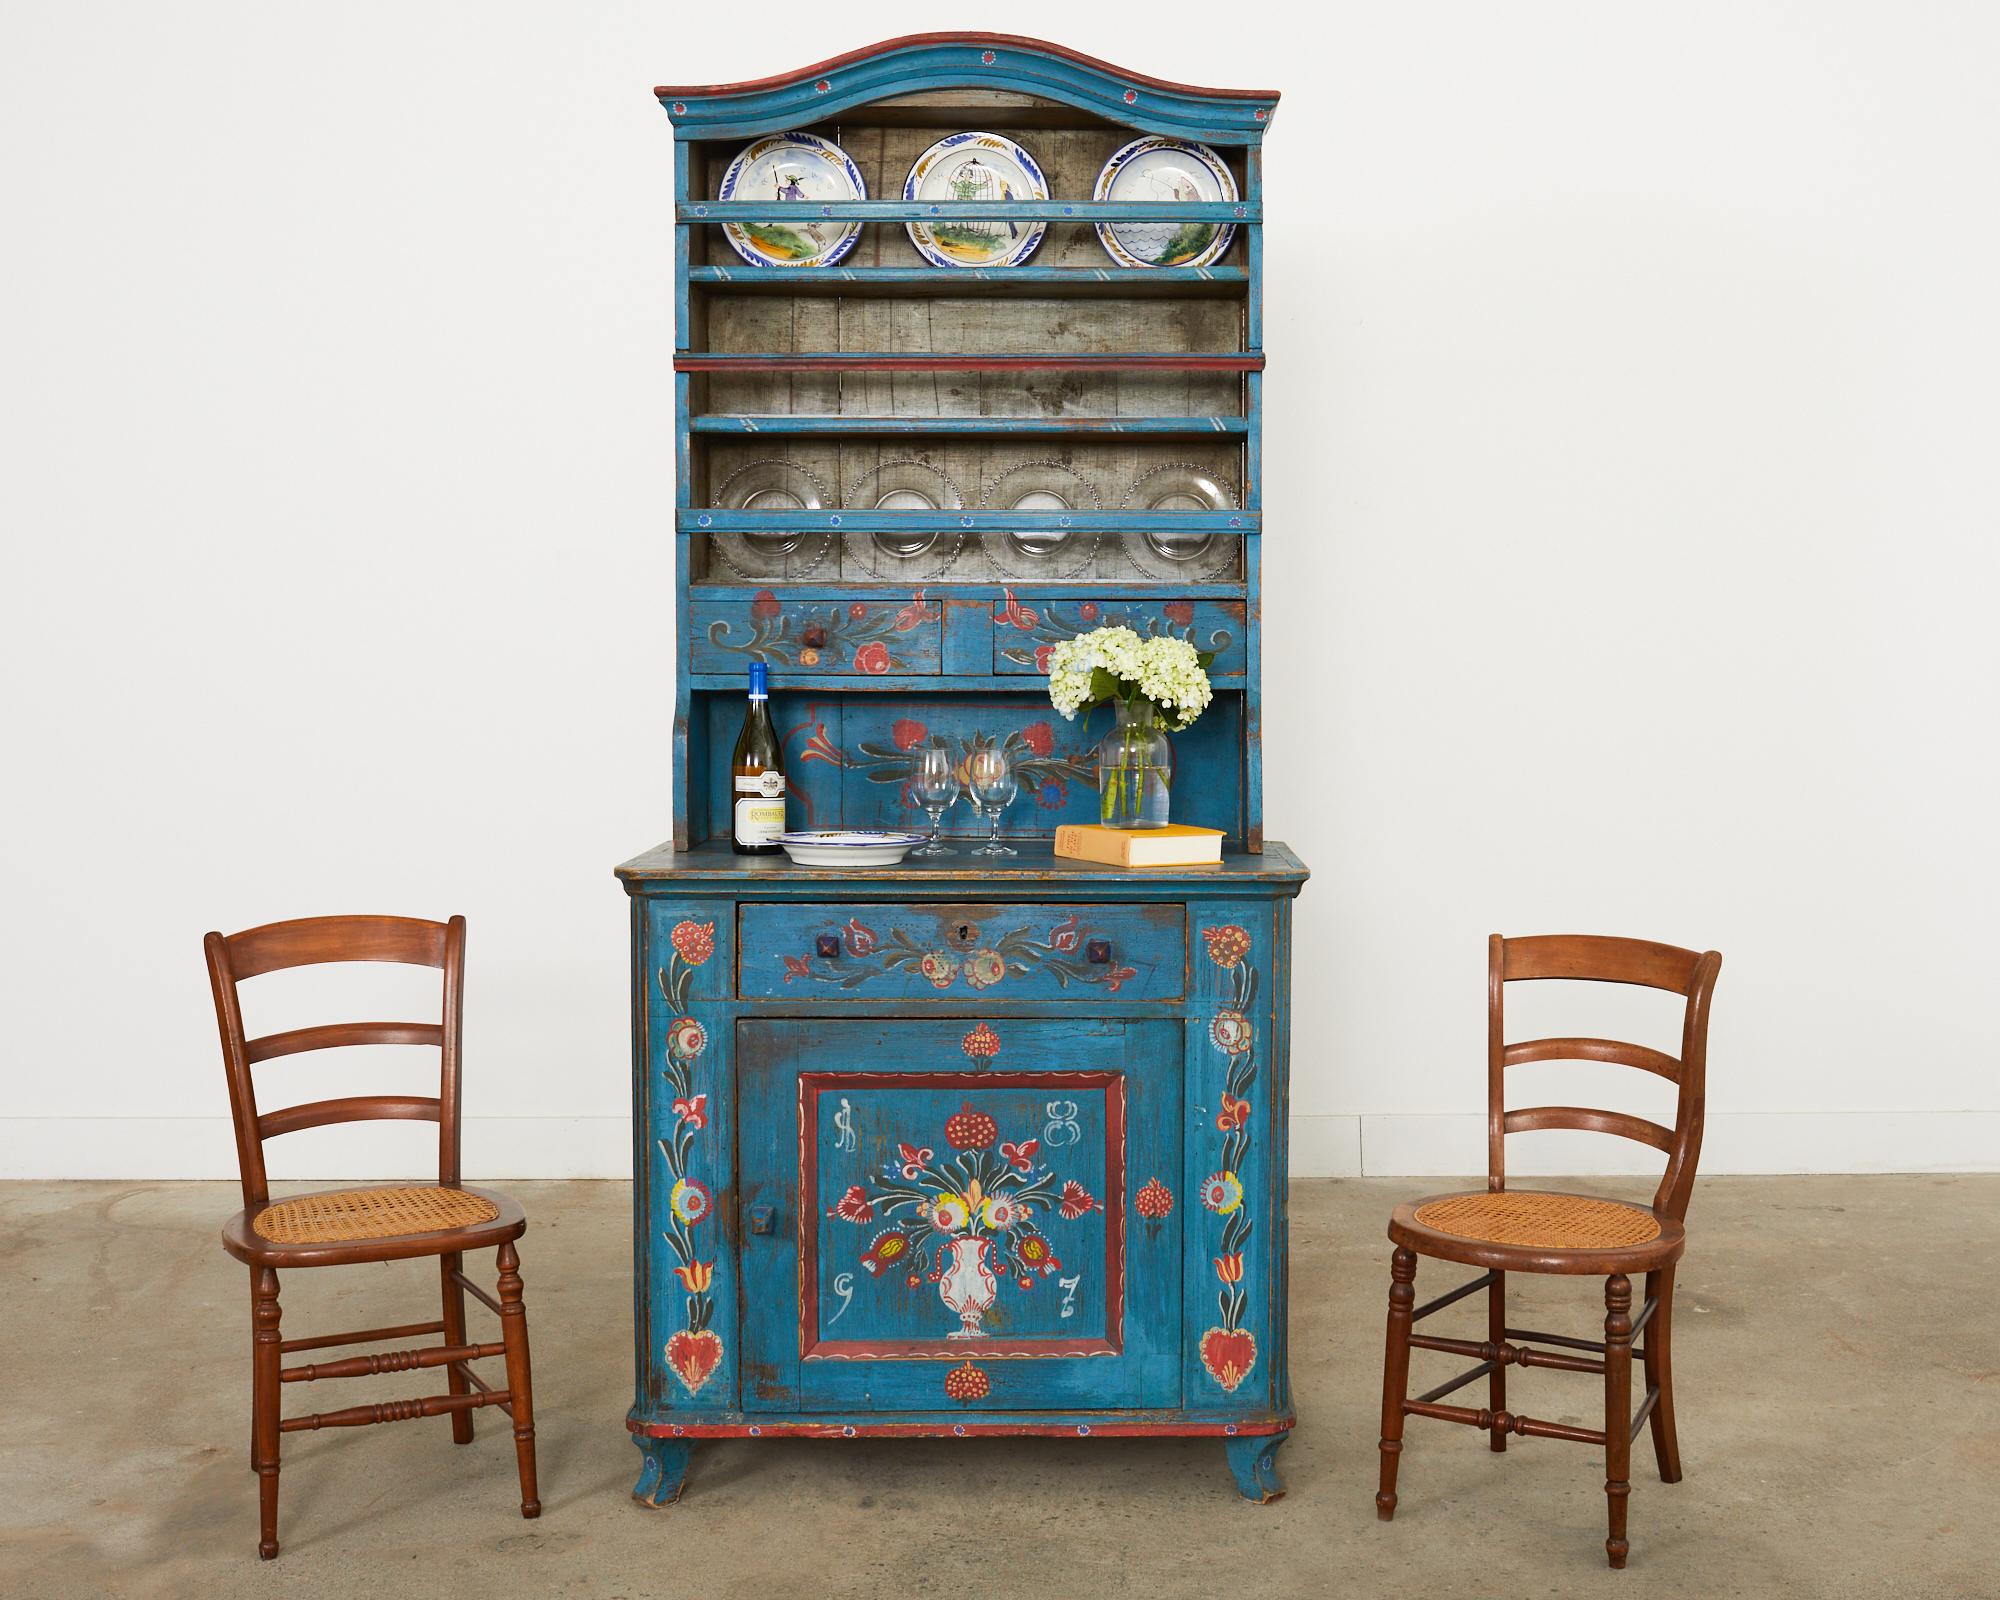 Whimsical 19th century country Swedish painted farmhouse cabinet dresser topped with a cupboard plate rack. The cabinet features a colorful festive folk art style painted finish with a floral motif centered by a vase with a floral spray. Crafted